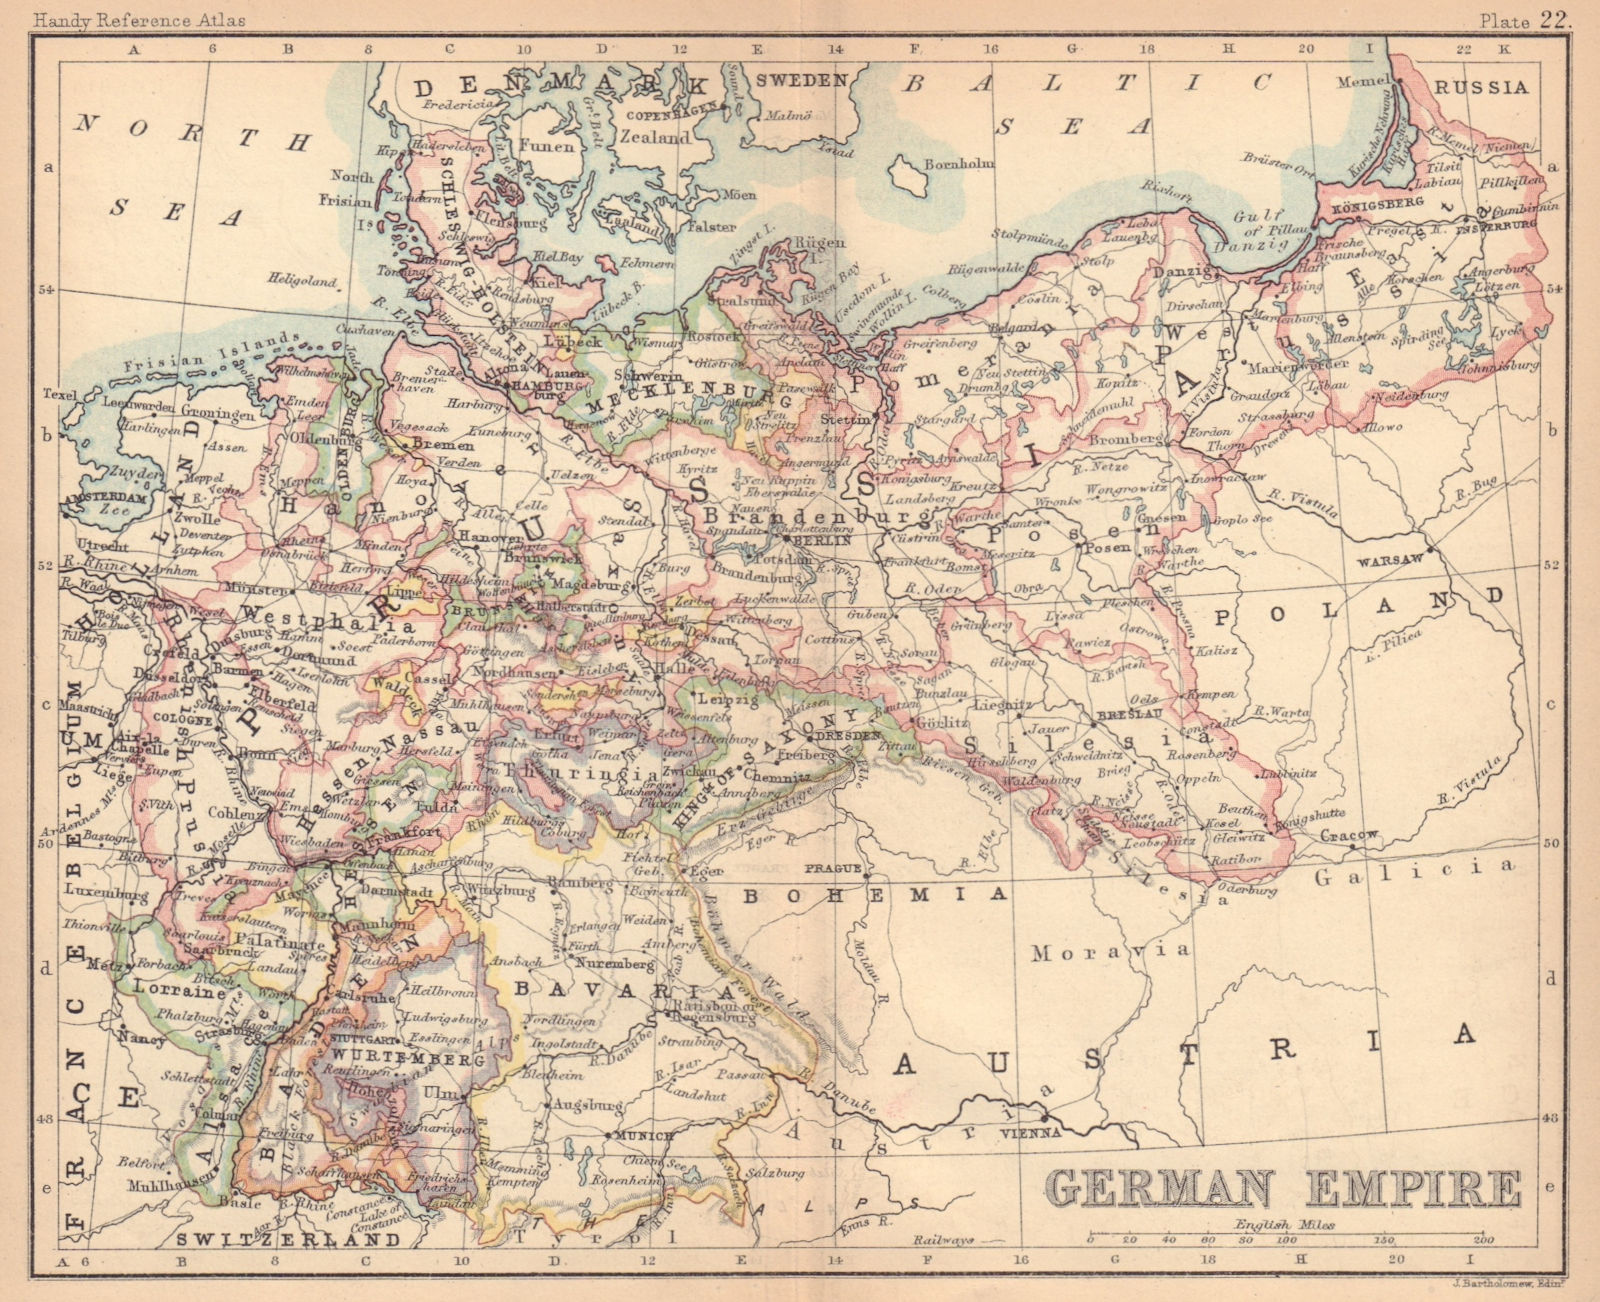 Associate Product German Empire. Germany Prussia Poland. BARTHOLOMEW 1888 old antique map chart